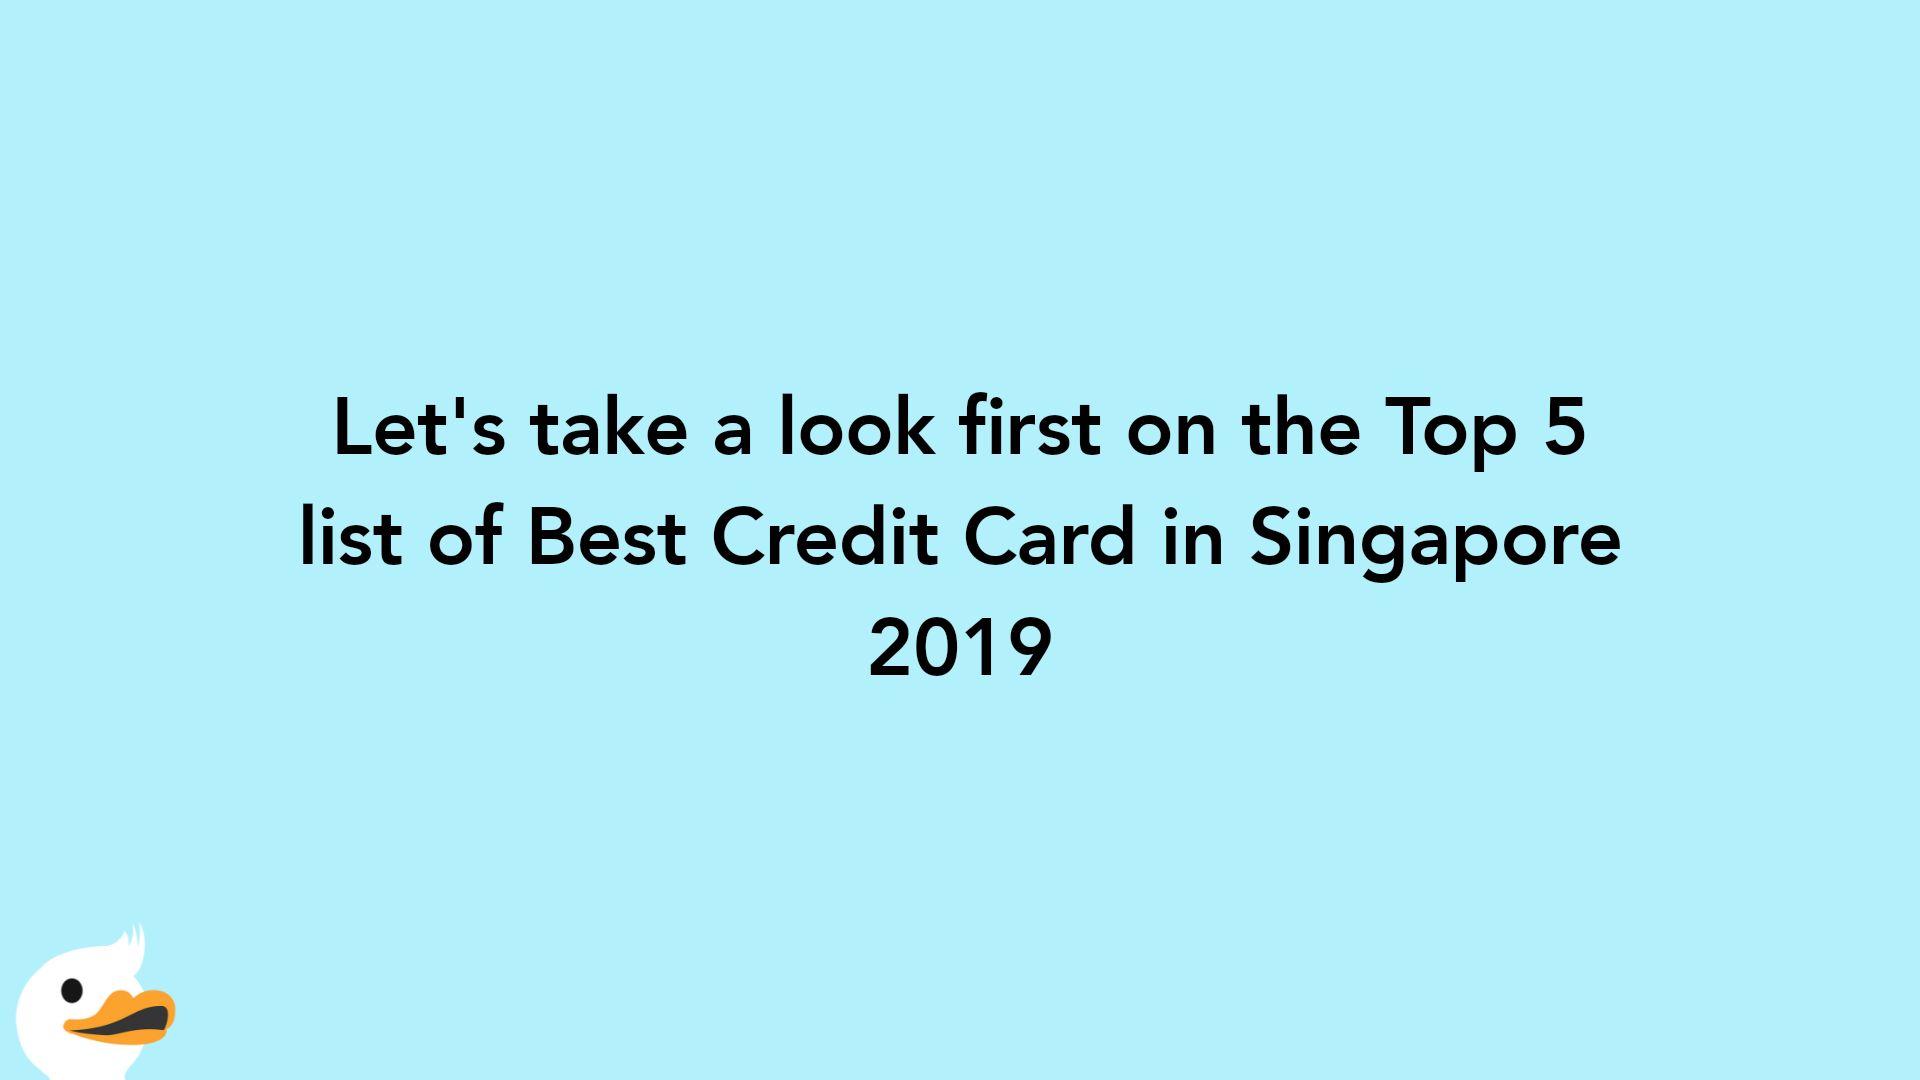 Let's take a look first on the Top 5 list of Best Credit Card in Singapore 2019